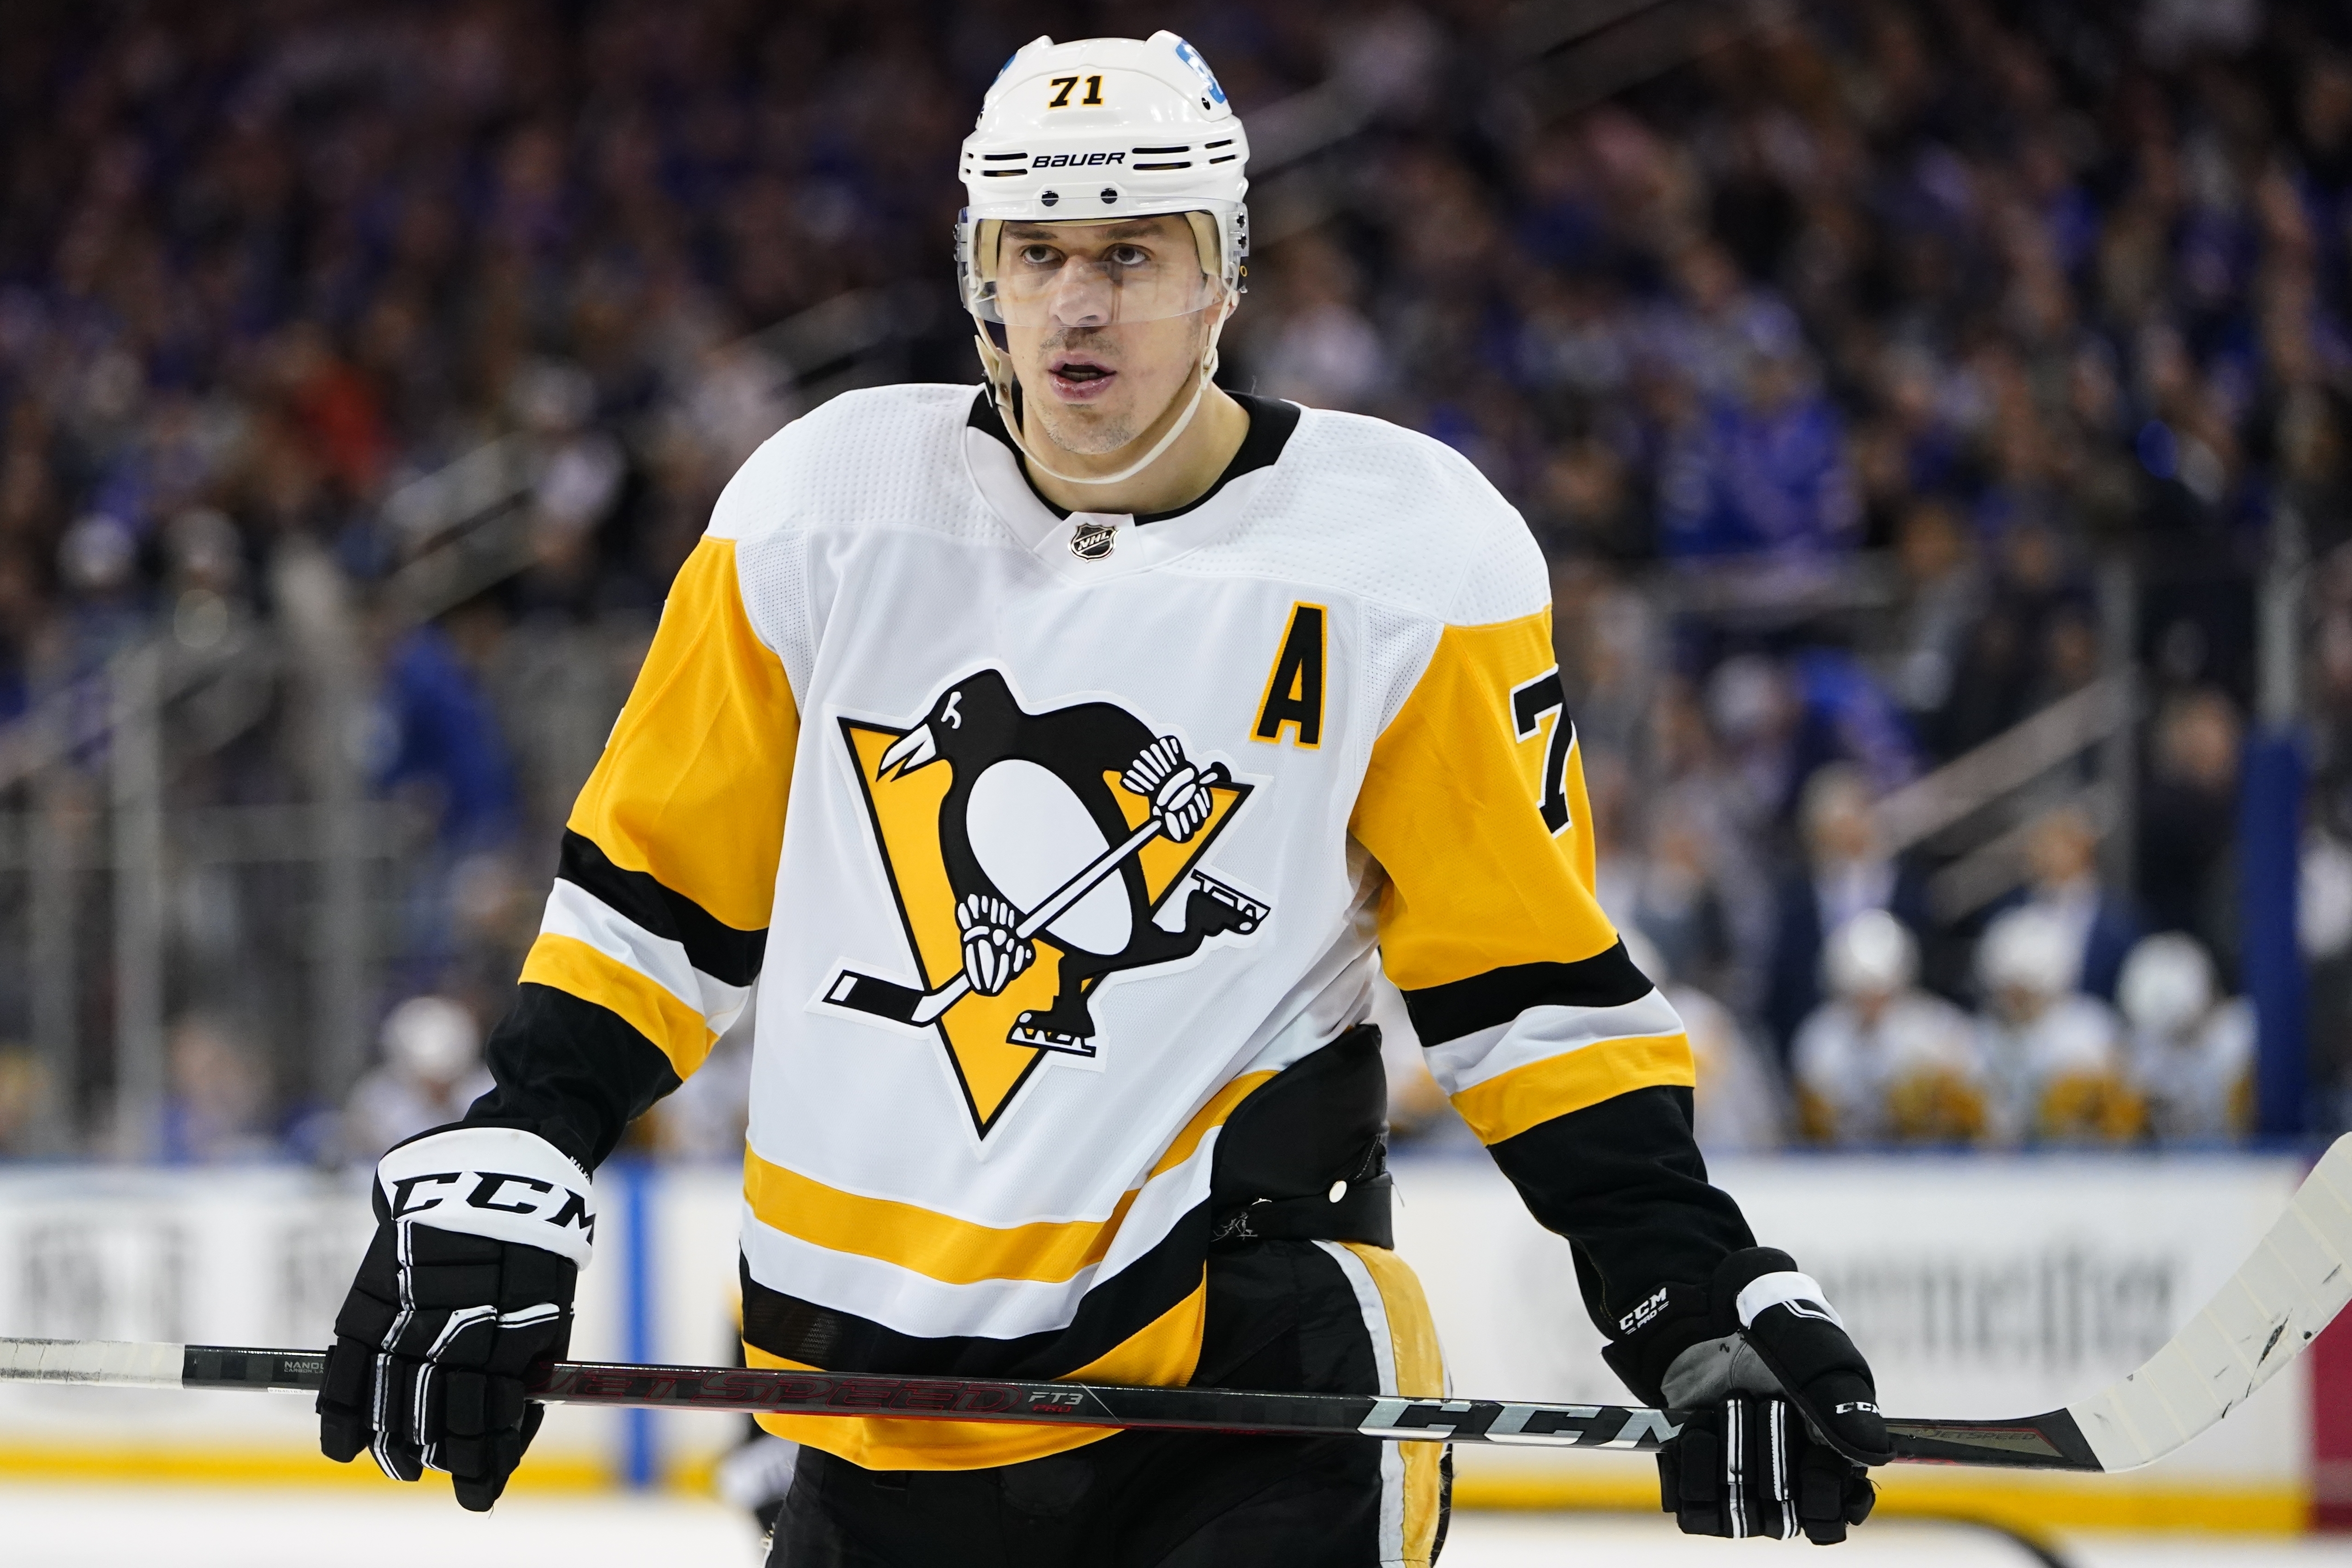 Penguins' Evgeni Malkin: 'Now we look forward' after disappointing season